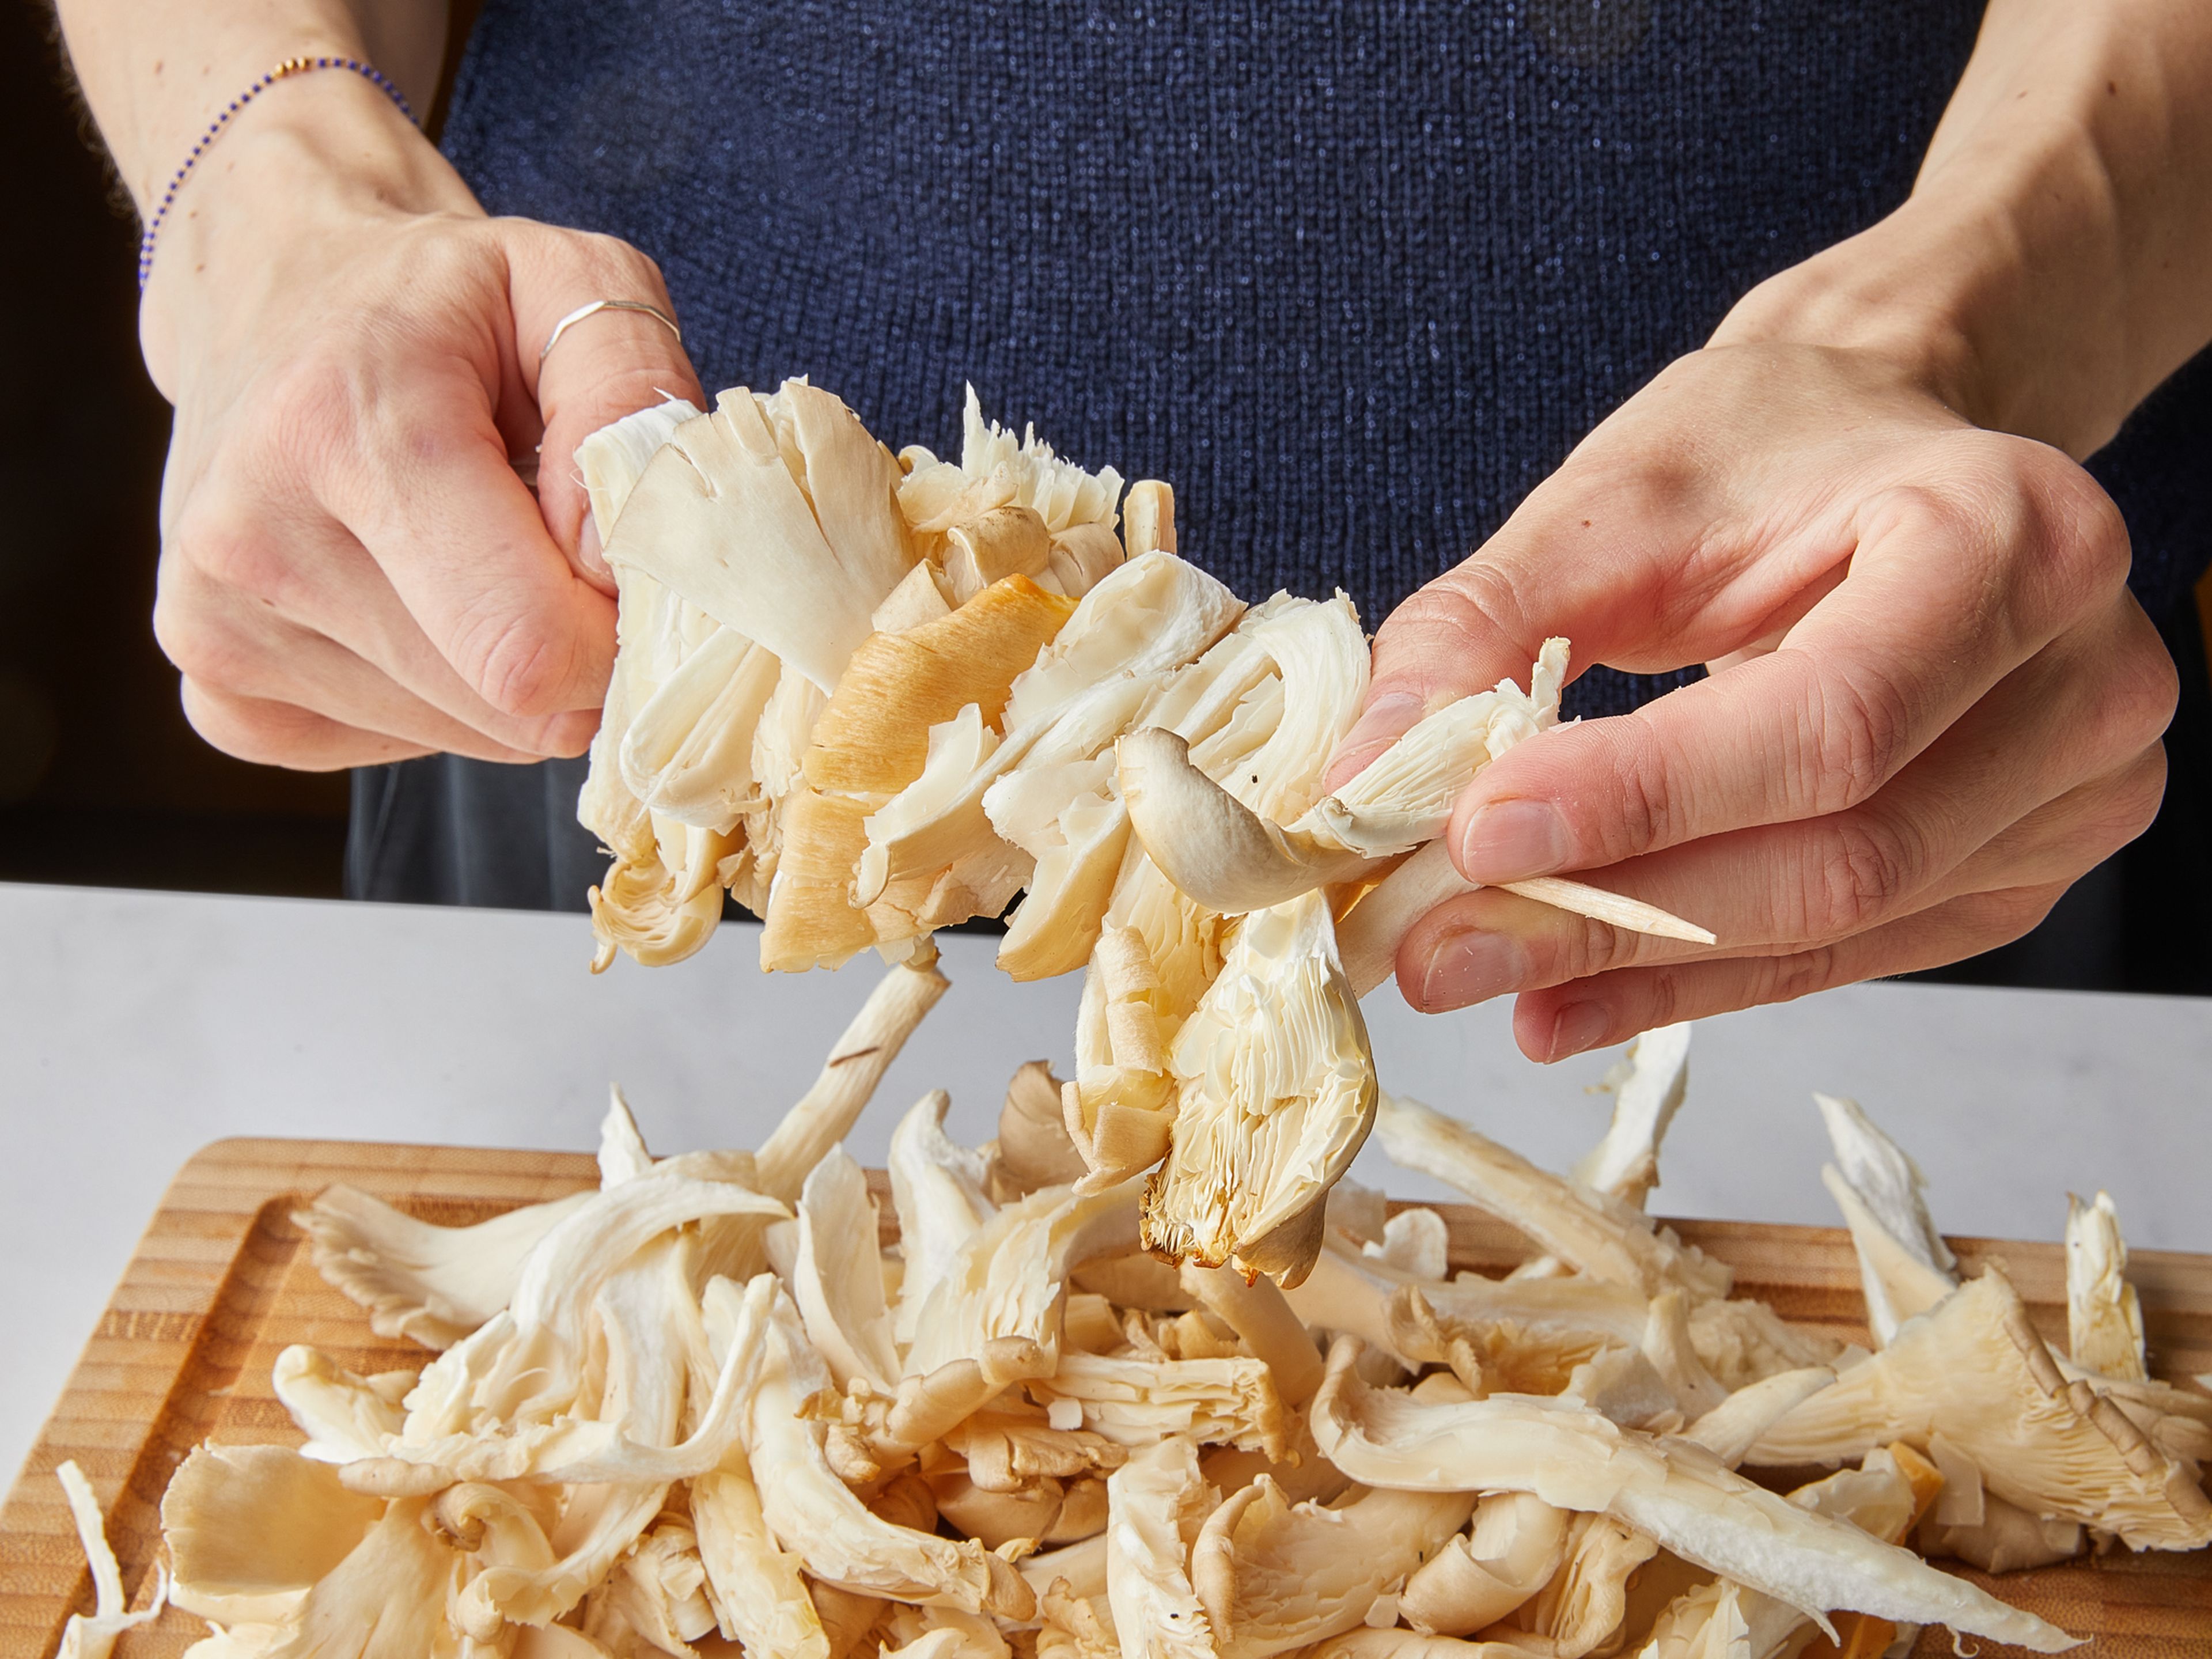 Soak the wooden skewers in warm water for about 30 minutes beforehand. Use your hands to tear the oyster mushrooms into even strips. Then place the mushroom strips closely but evenly spaced on the wooden skewers. This makes about 6-8 skewers.